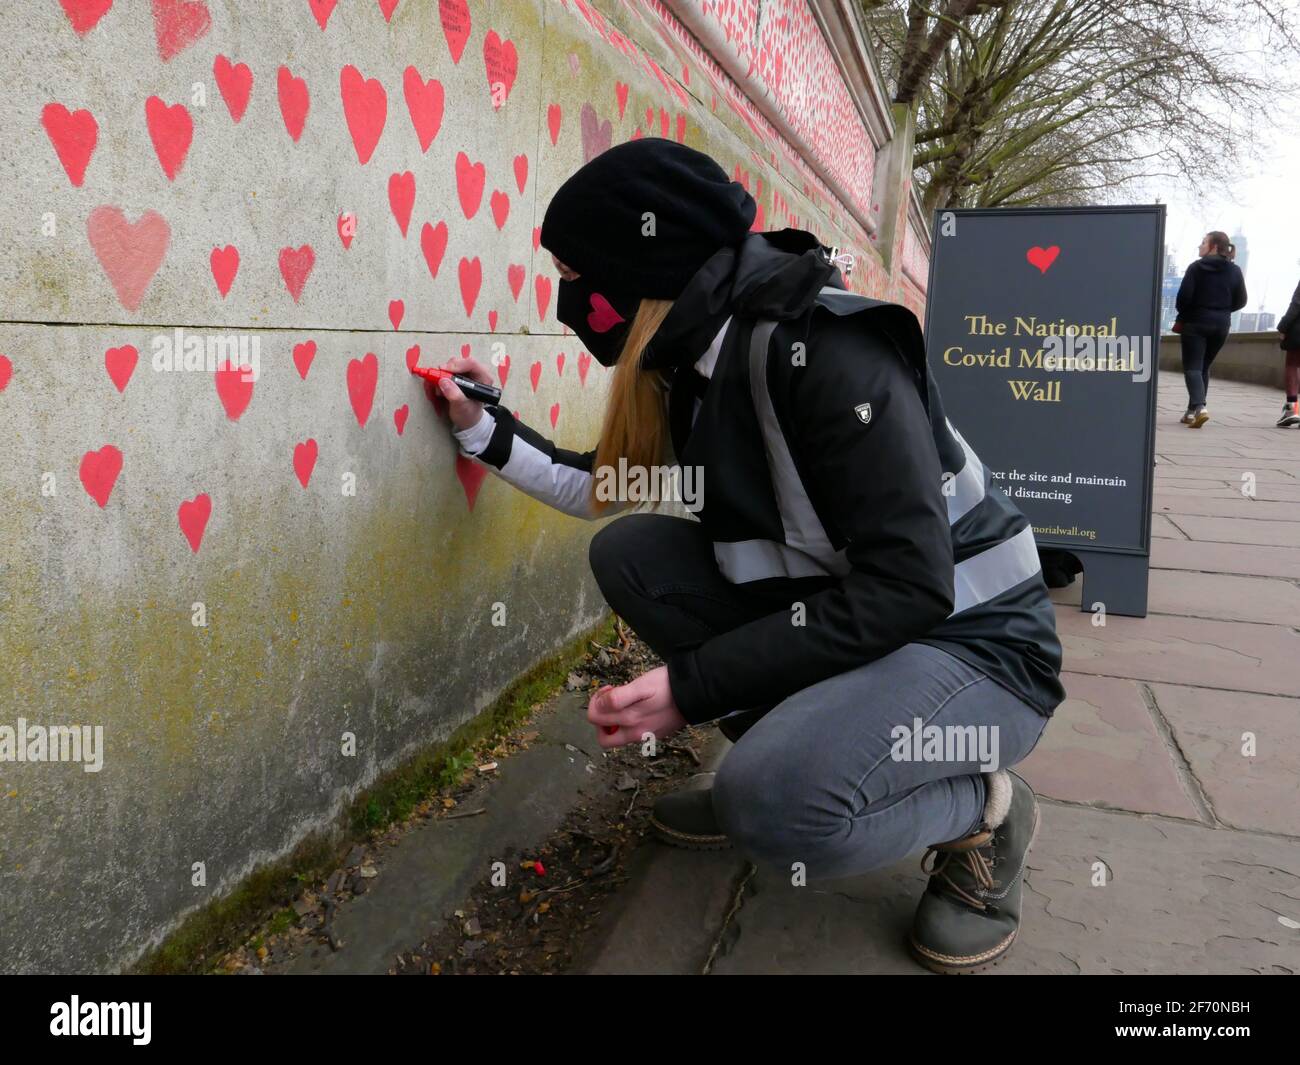 ‘An outpouring of love’ – enormous Covid-19 Memorial Wall begun opposite Parliament London, Monday 29 March– Bereaved families have today begun the creation of a vastCovid-19 Memorial Wall, on the Embankment opposite the Houses of Parliament in Westminster, London.Painting individual red hearts for each of the more than 145,000 lives lost to the virus, the group hopes to put personal stories at the heart of the Government’s approach to learning lessons from  the pandemic and expects the wall to stretch to  over half a kilometre in the coming days. Stock Photo